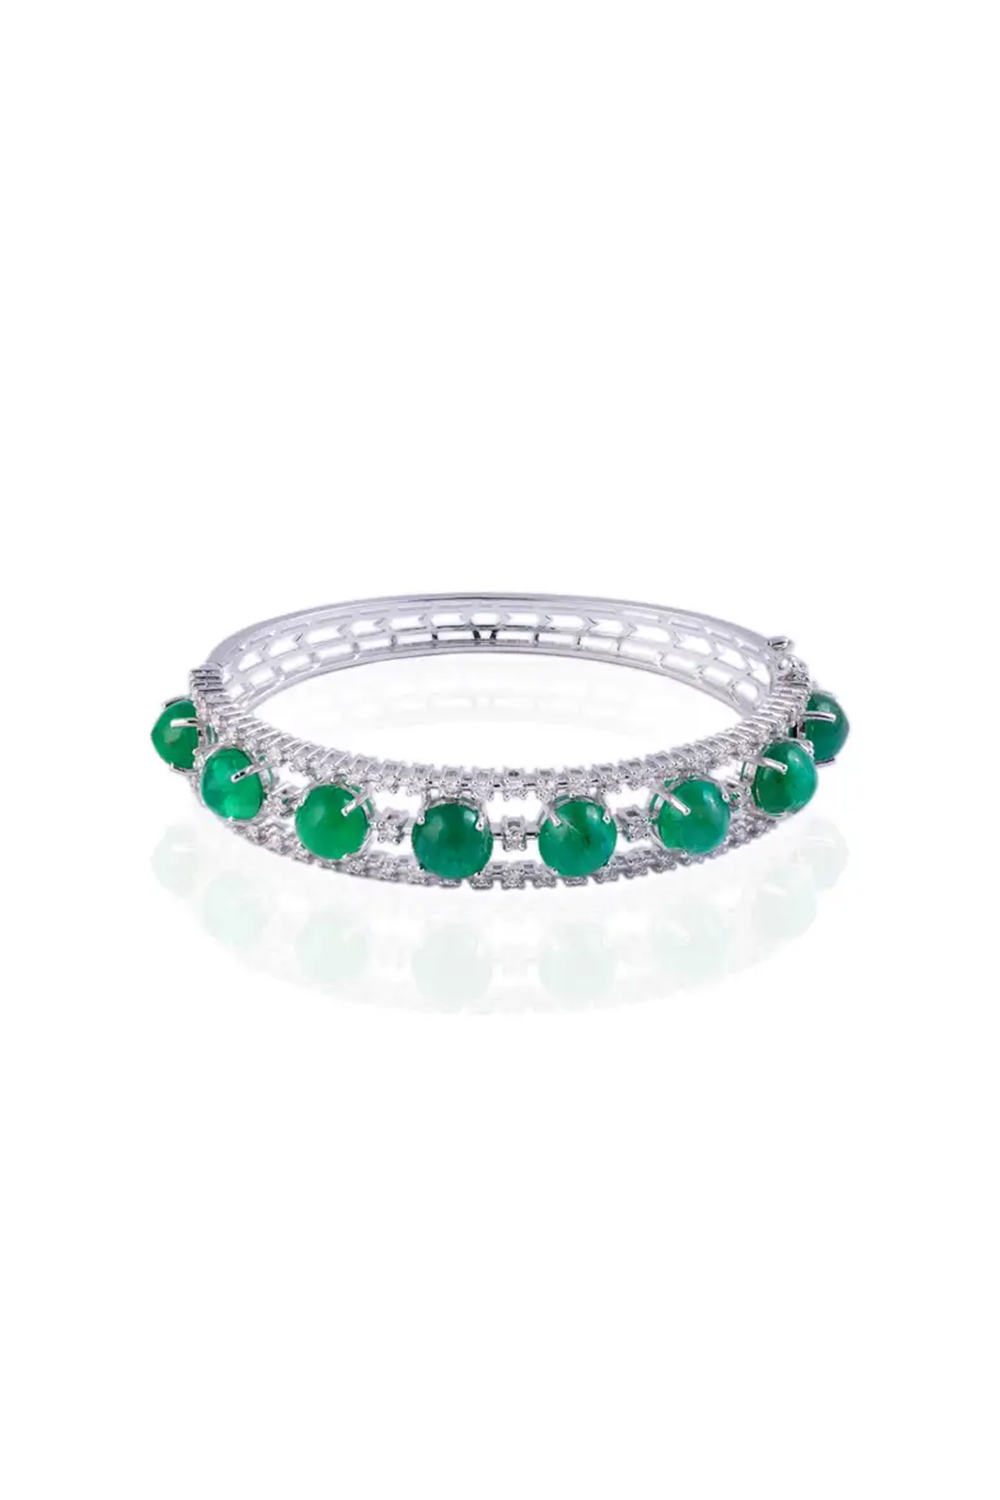 Natural Zambian Emerald 15.18cts and 1.59cts Diamond Bracelet in 14k Gold